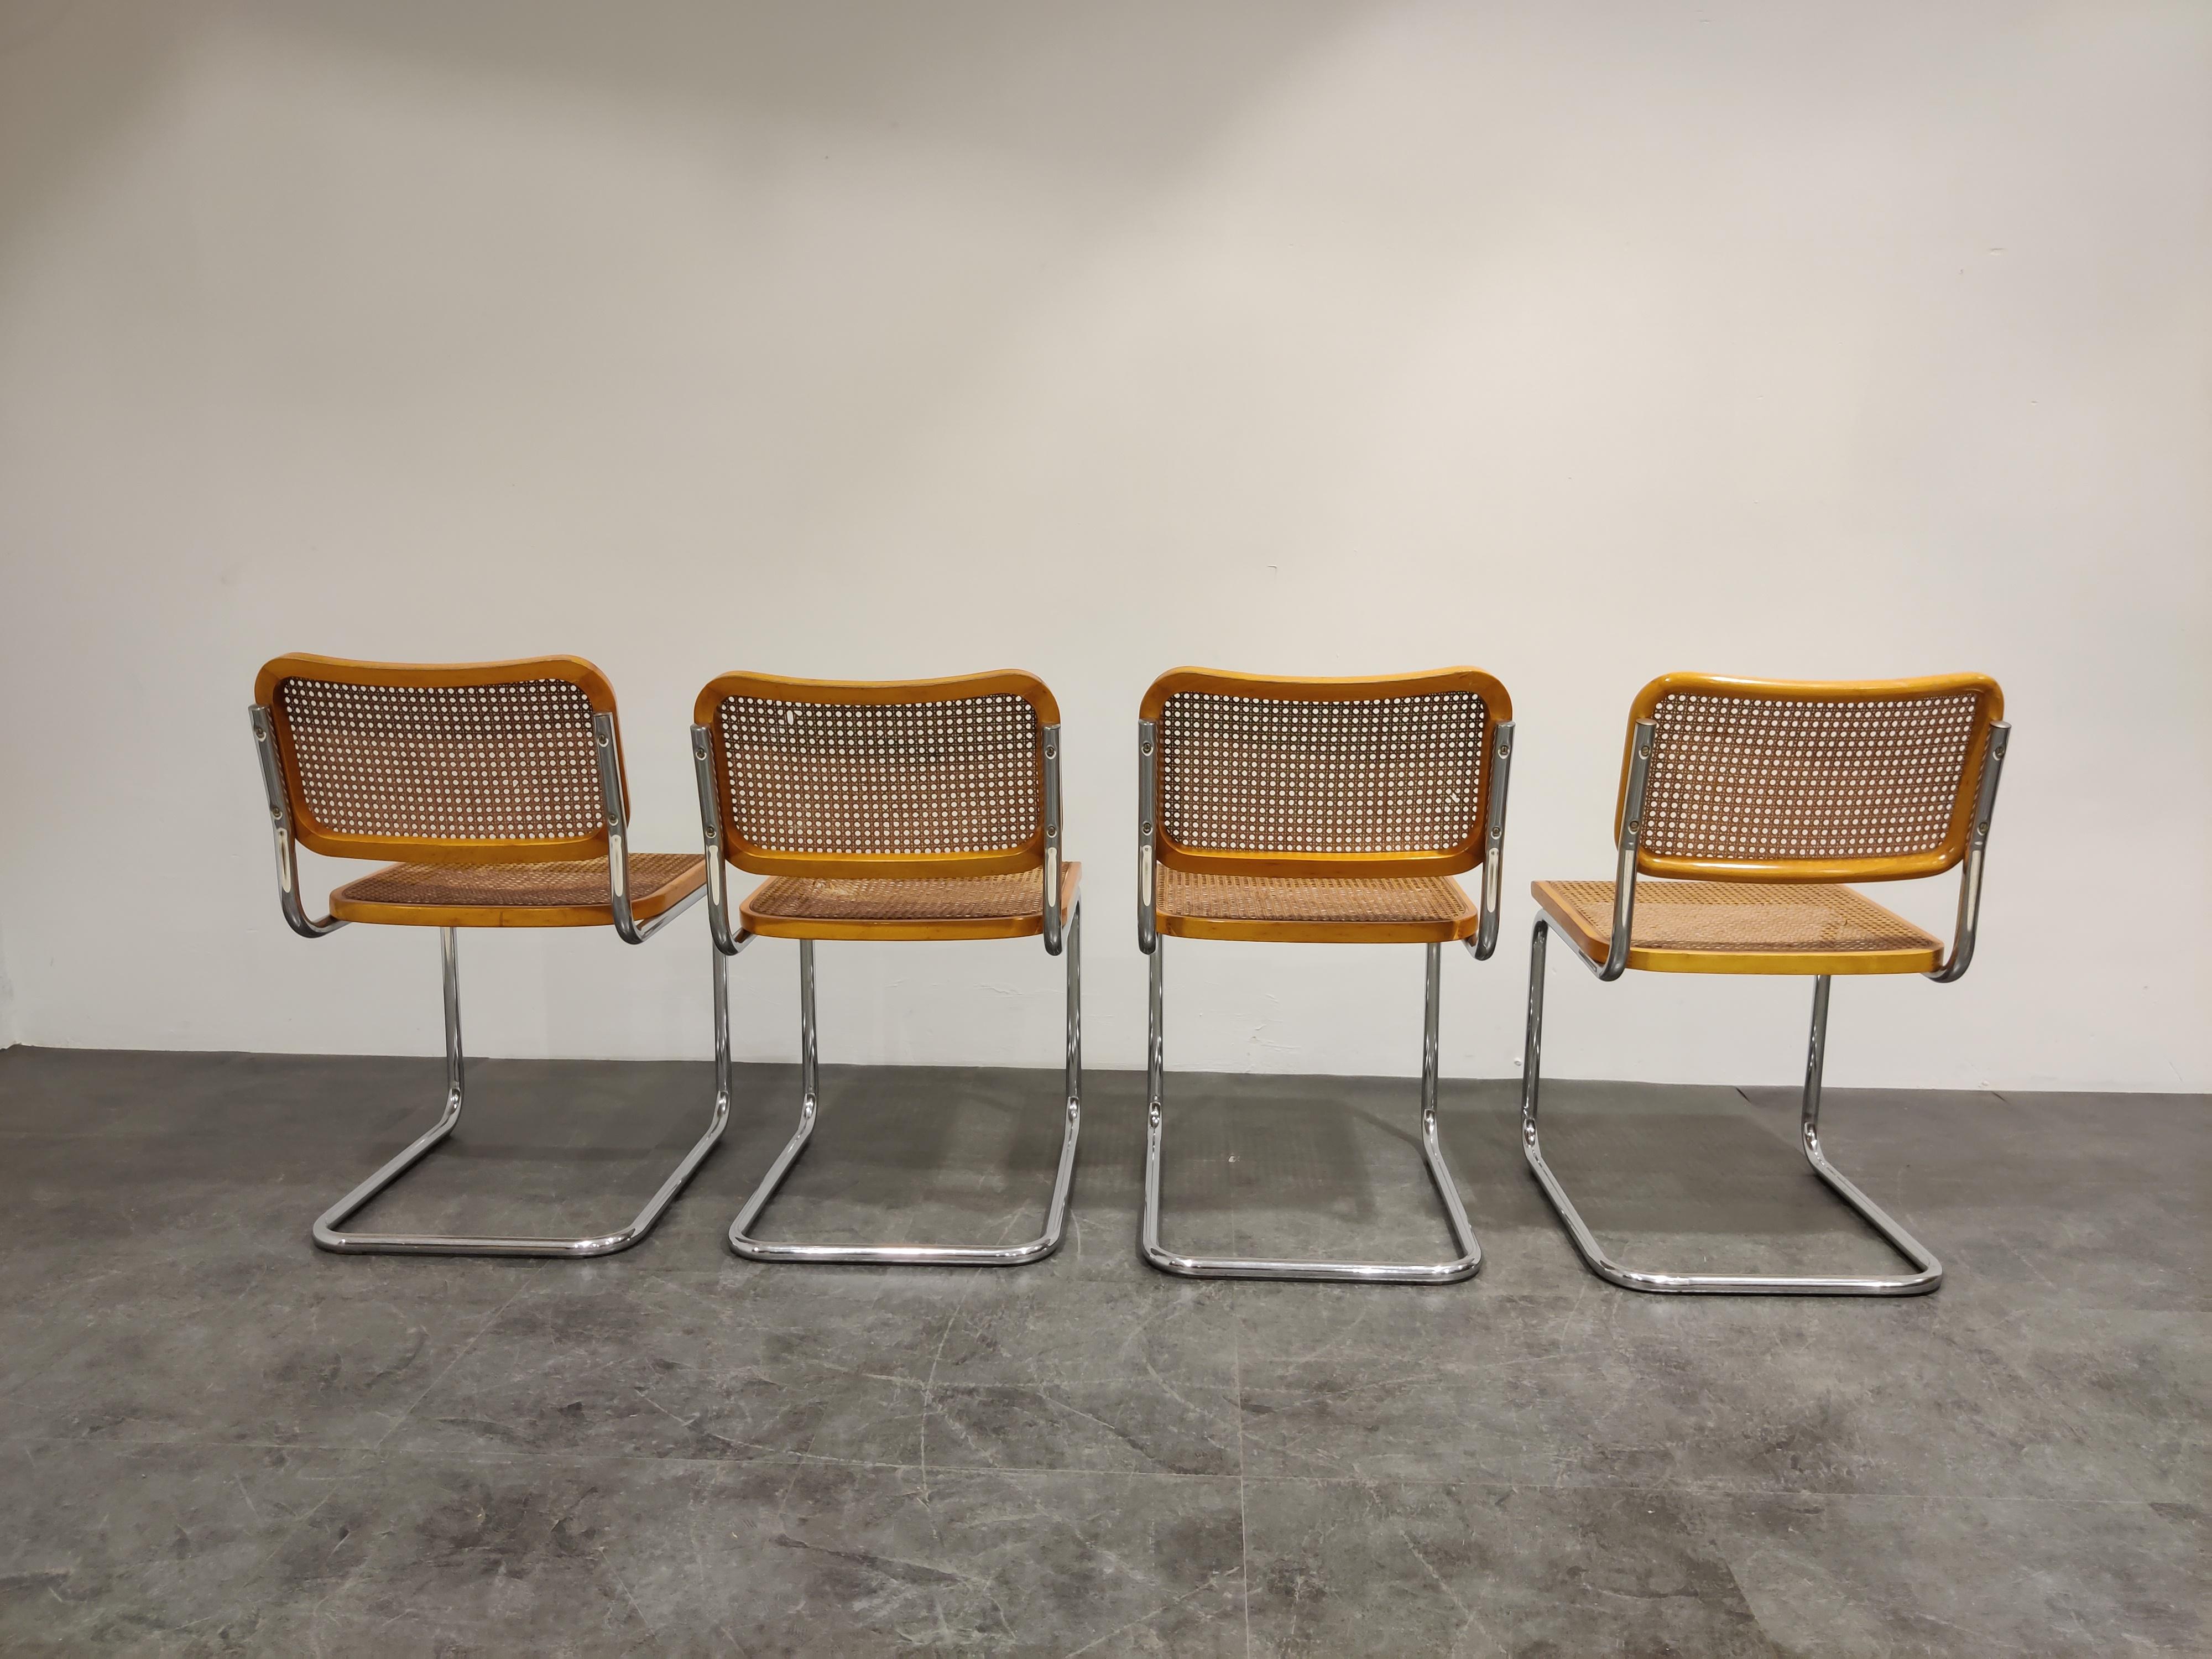 Bauhaus Set of 4 Vintage Marcel Breuer Cesca Chairs, Made in Italy, 1970s